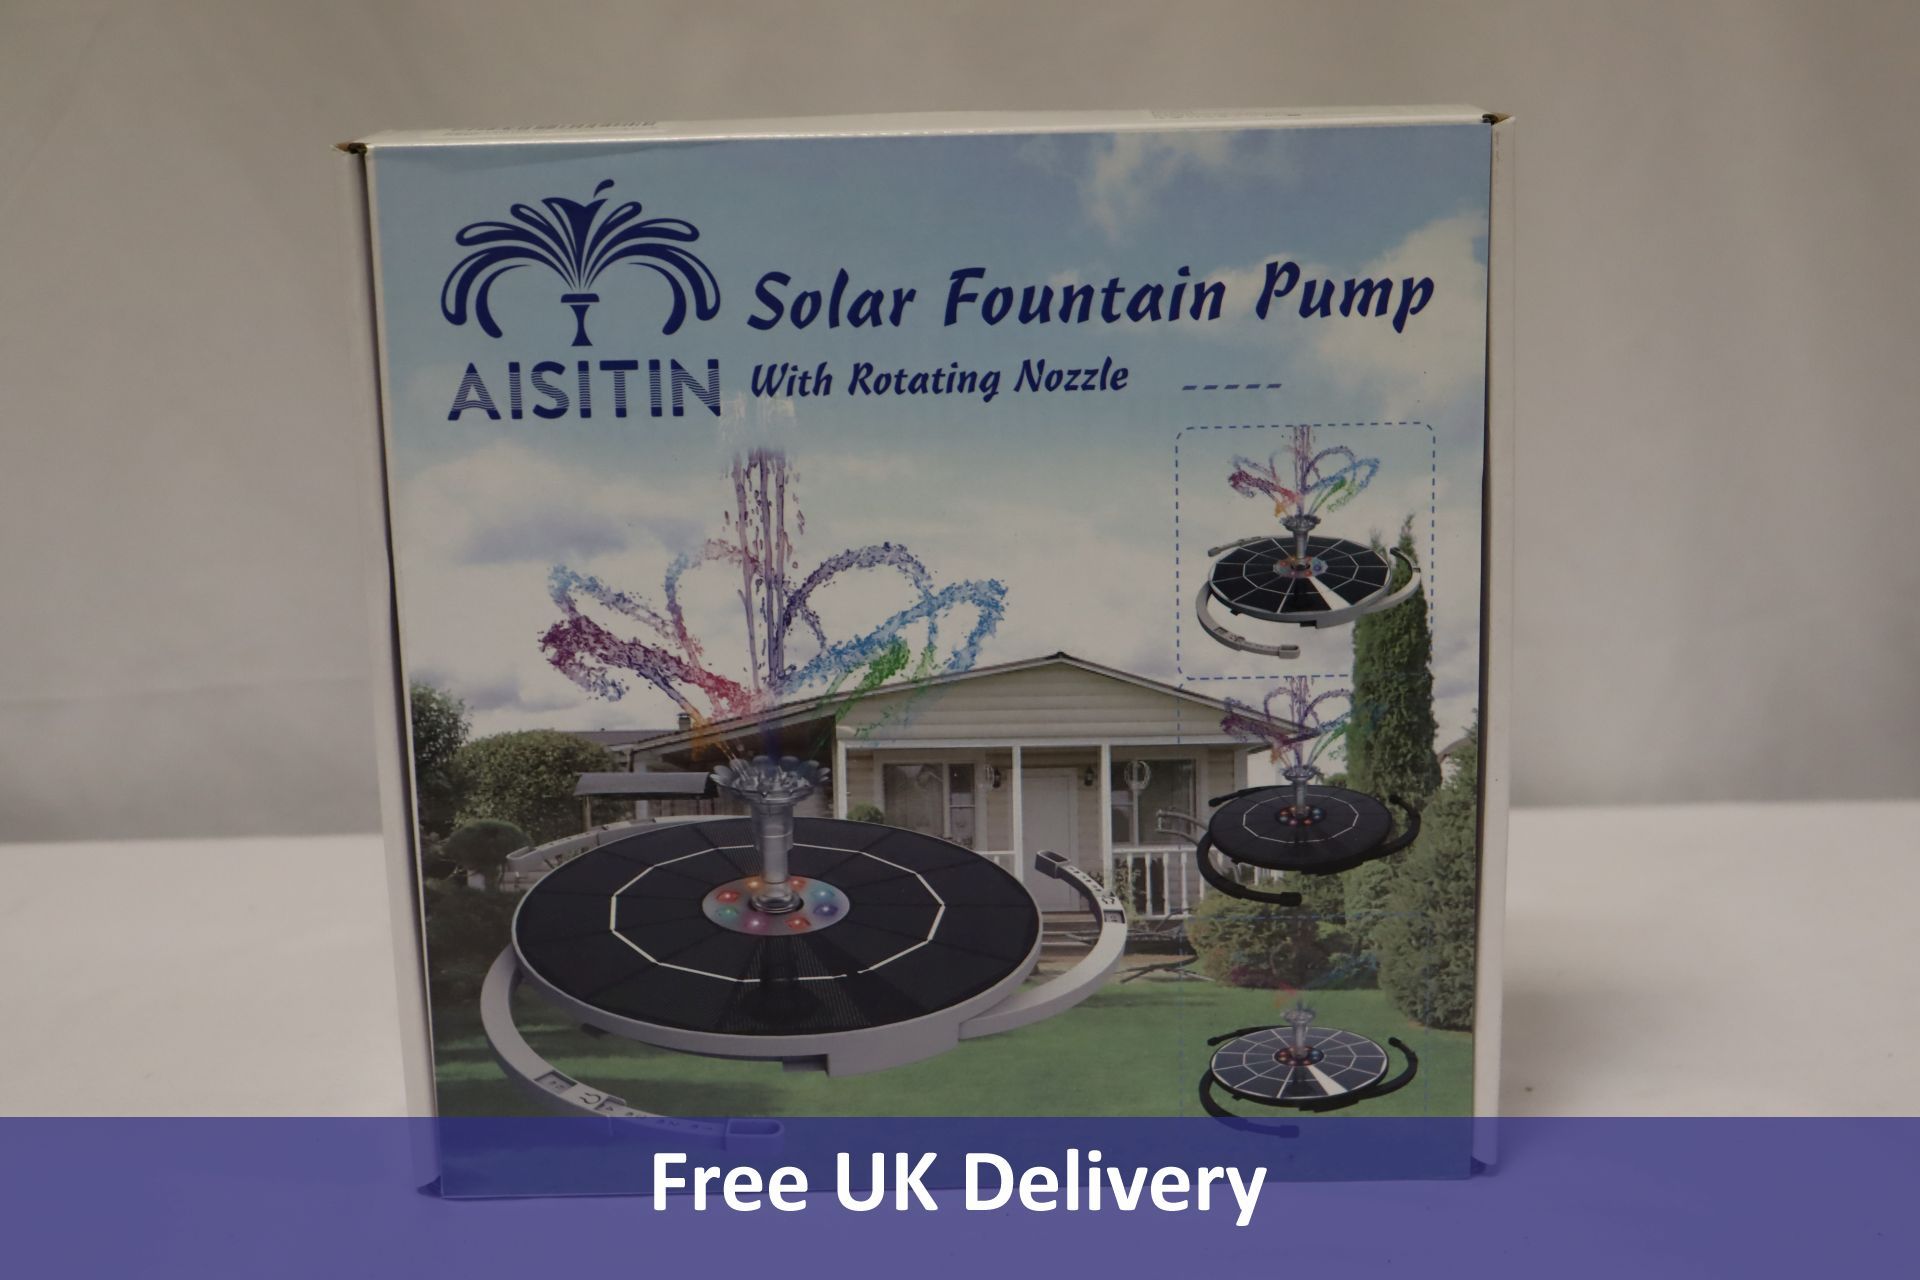 Two Aisitin 5.5w LED Solar Fountain Pumps with Rotating Nozzle